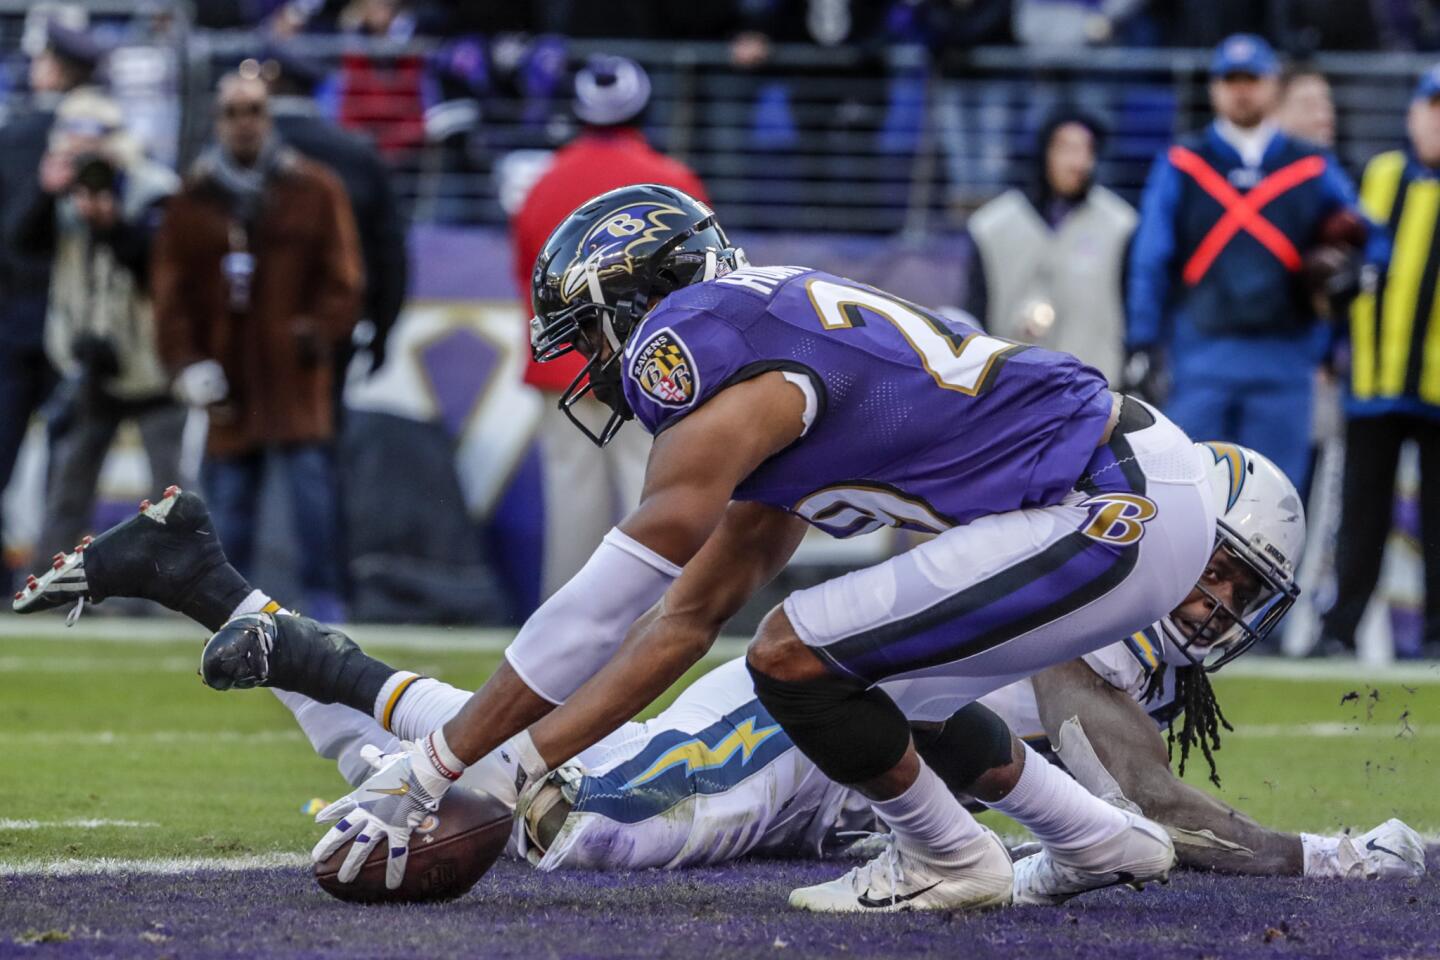 Ravens cornerback Marlon Humphrey scoops up an apparent fumble by Chargers running back Melvin Gordon and returns it 100-yards for a touchdown that was called back after a replay review early in the fourth quarter.